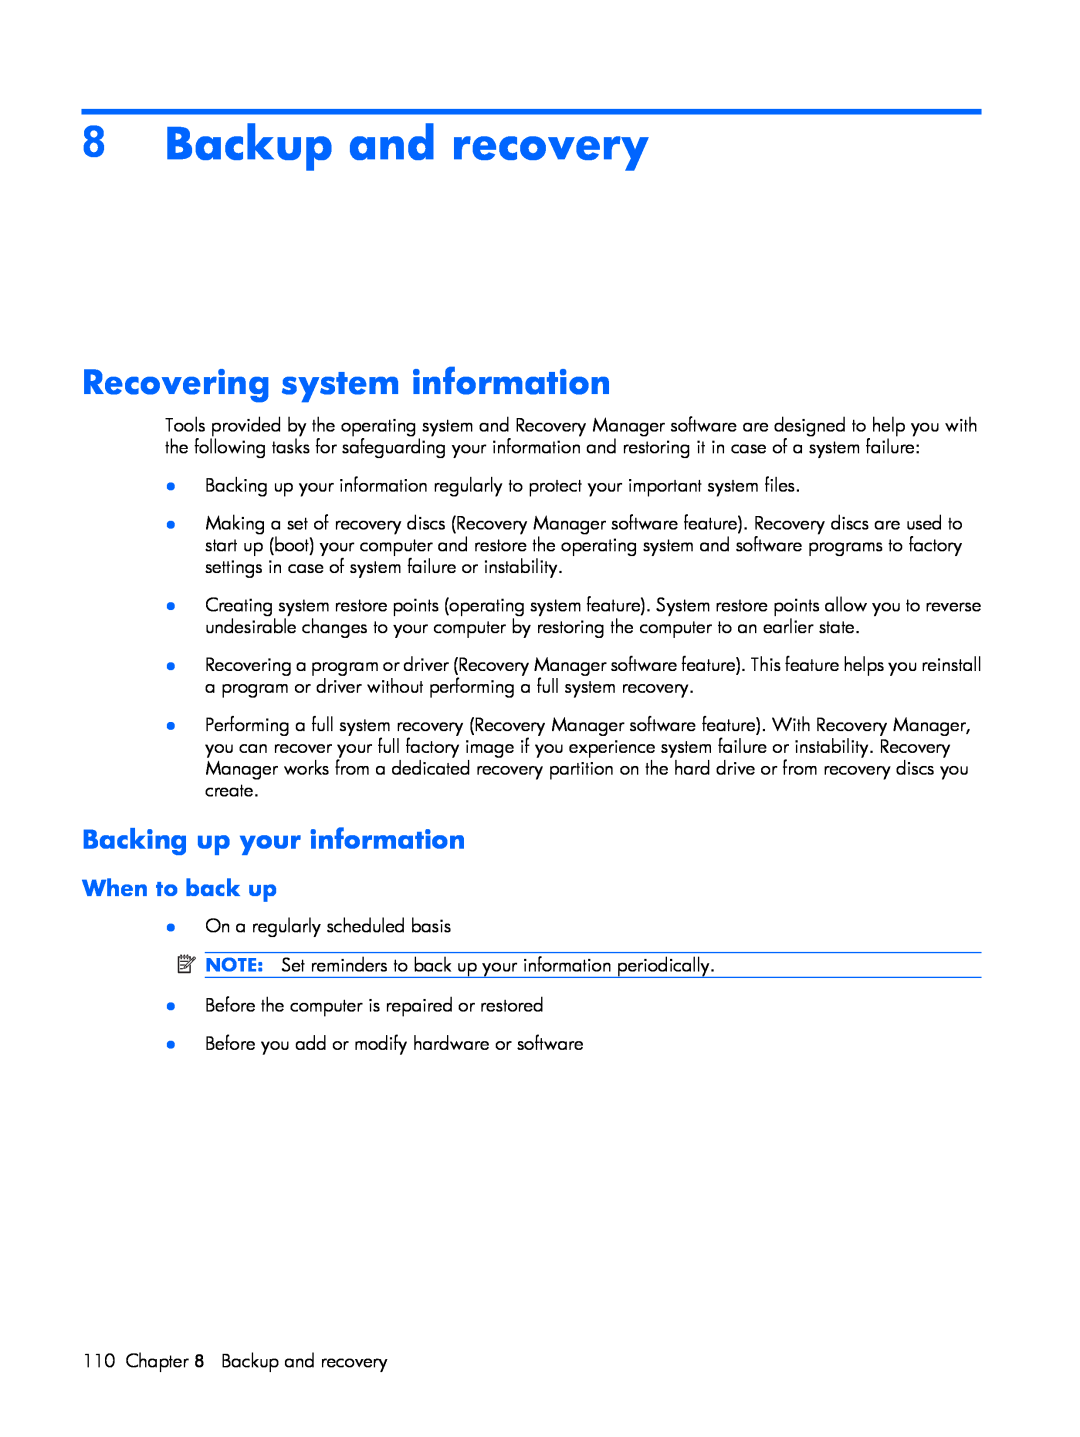 HP C741TU, C721TU, C725BR Backup and recovery, Recovering system information, Backing up your information, When to back up 